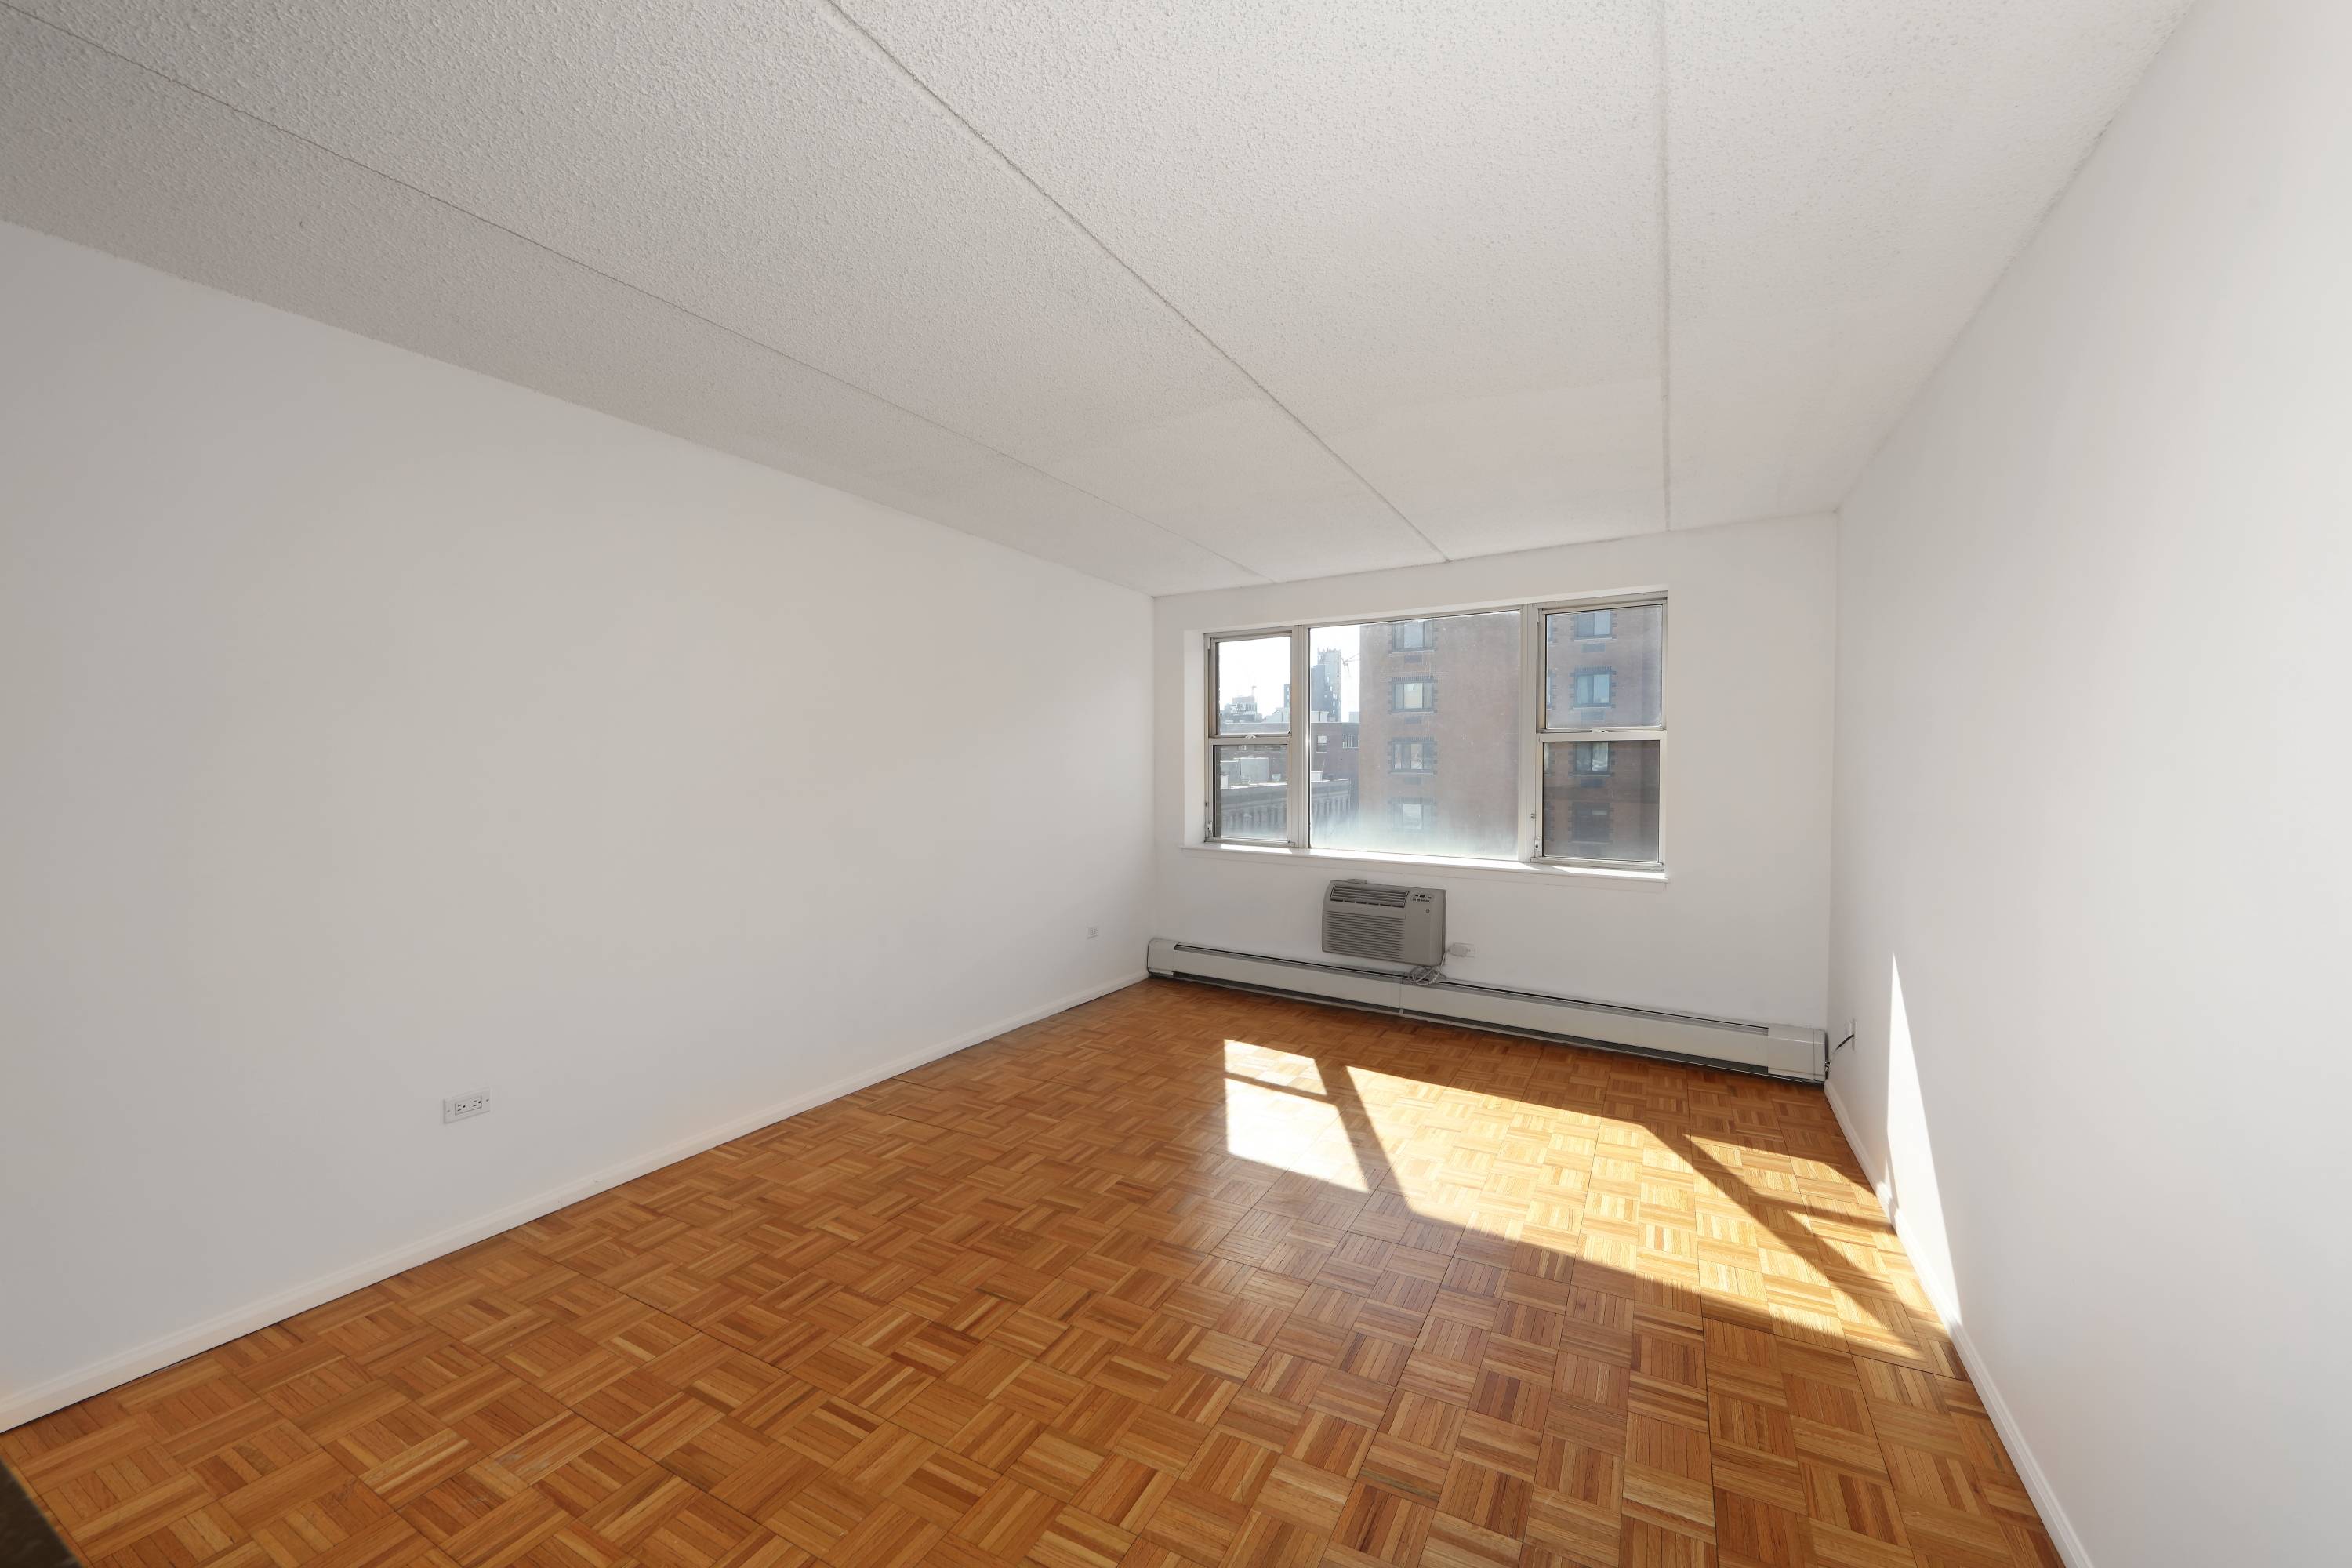 BRIGHT NO FEE 1 Bedroom, with Dishwasher, in Elevator SOHO Building. AMAZING Location!!